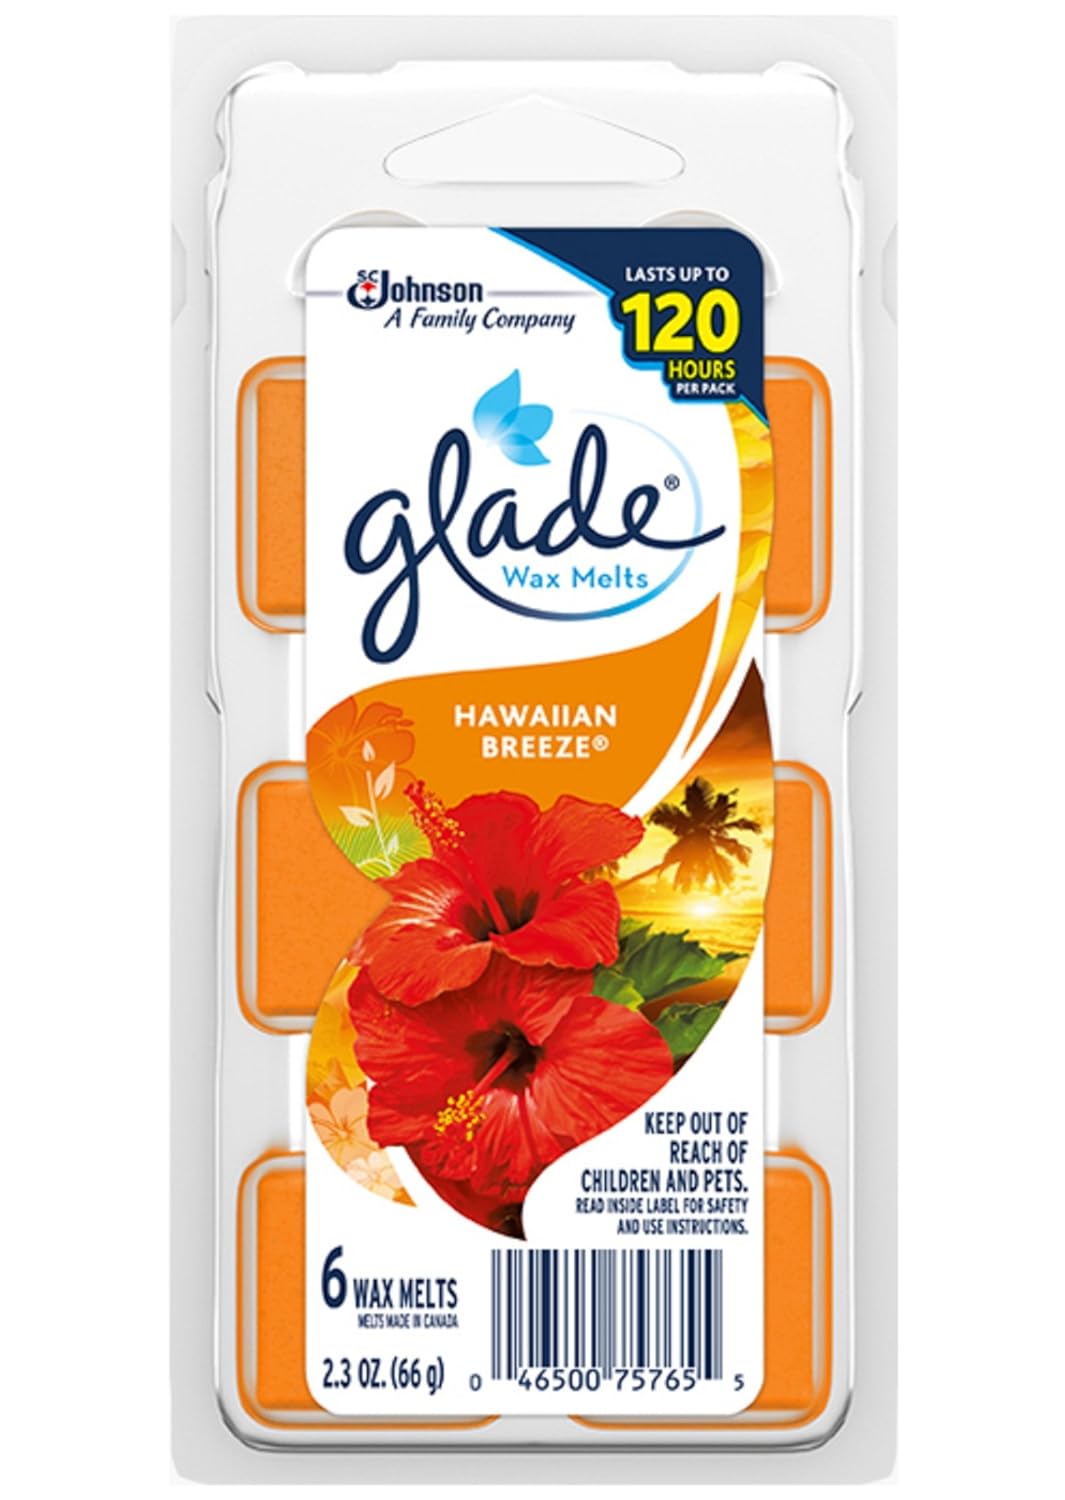 Glade Wax Melts Air Freshener - Hawaiian Breeze - 6 Count Wax Melts Per Package - Net Wt. 2.3 OZ (66 g) Per Package - Pack of 4 Packages : Health & Household